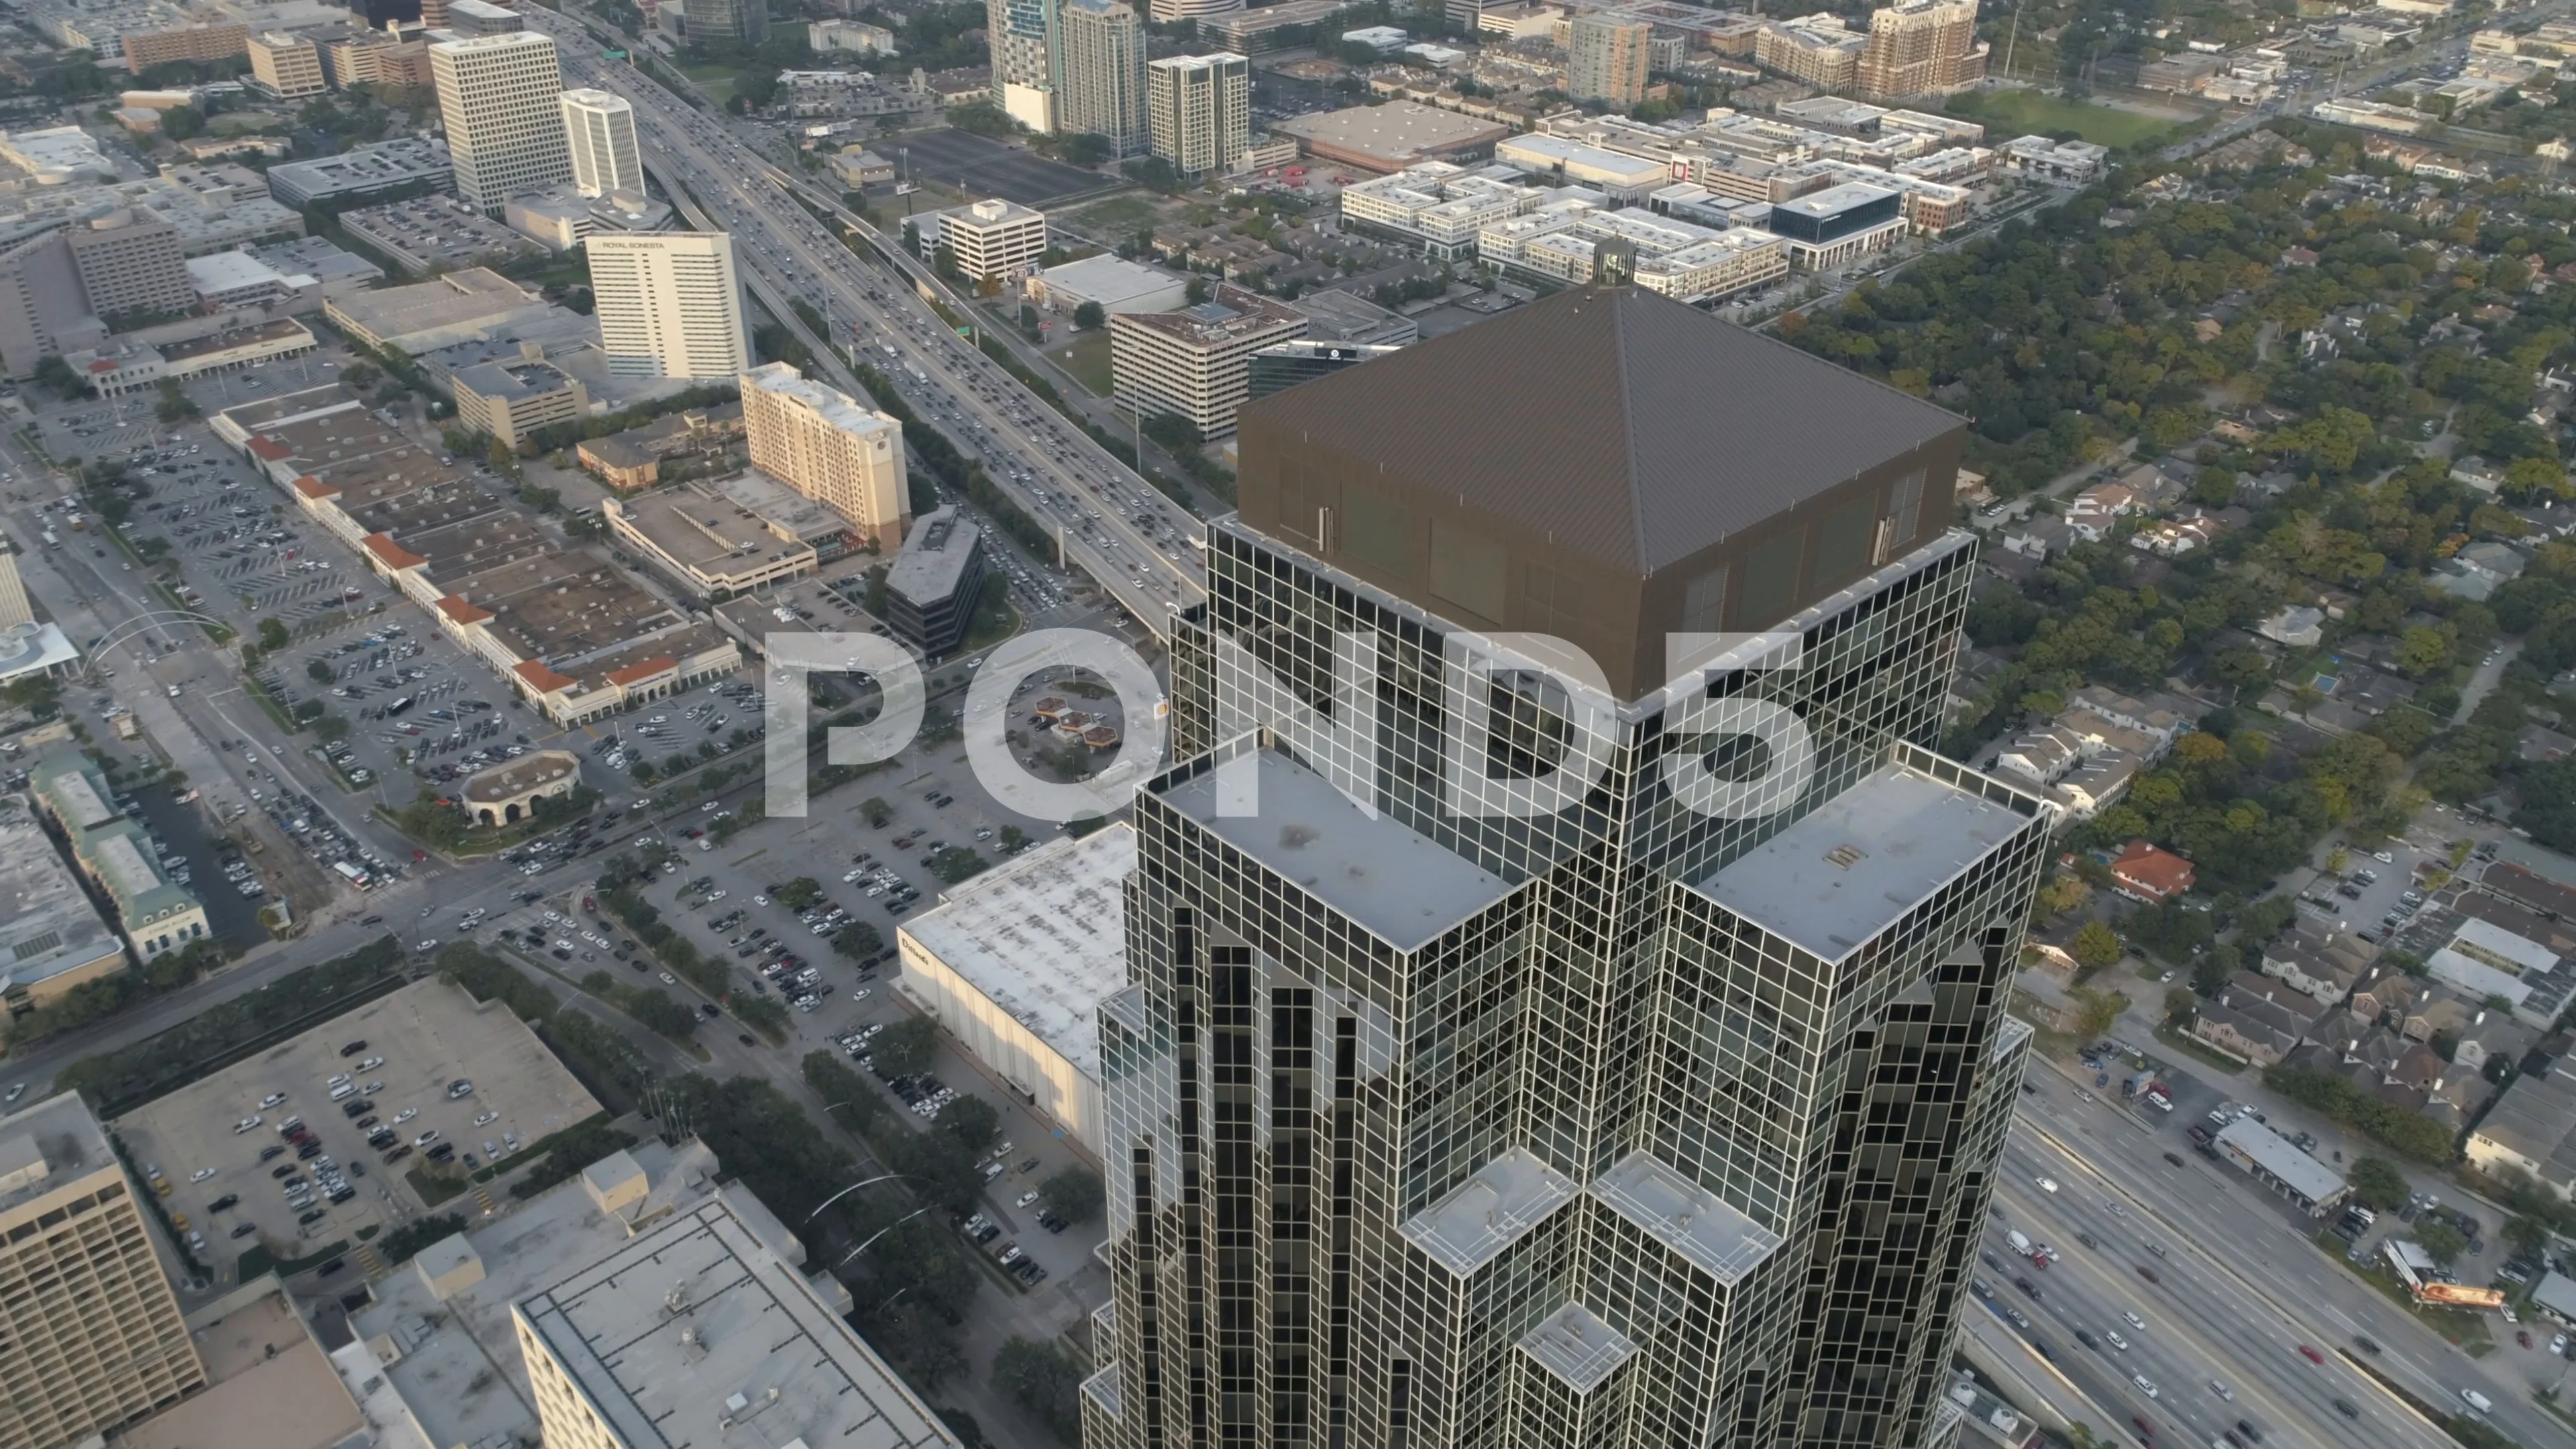 Aerial view of the Houston Galleria area with Williams Tower